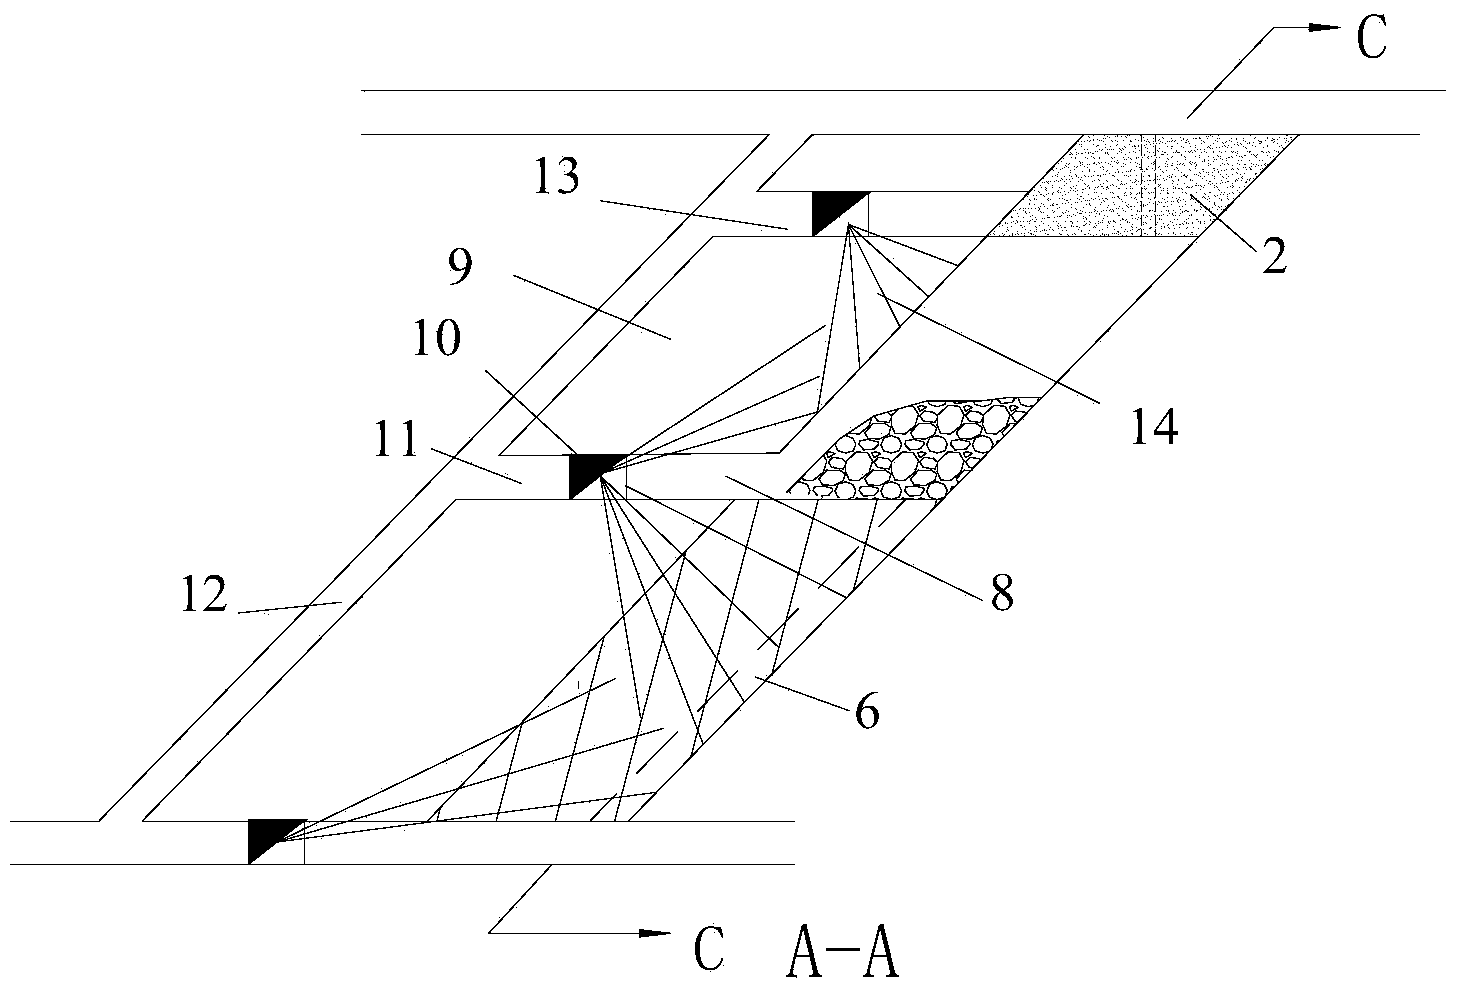 Medium-length hole ore breaking synergistic anchor cable support subsequent filling mining method of combined reconstructed structural body